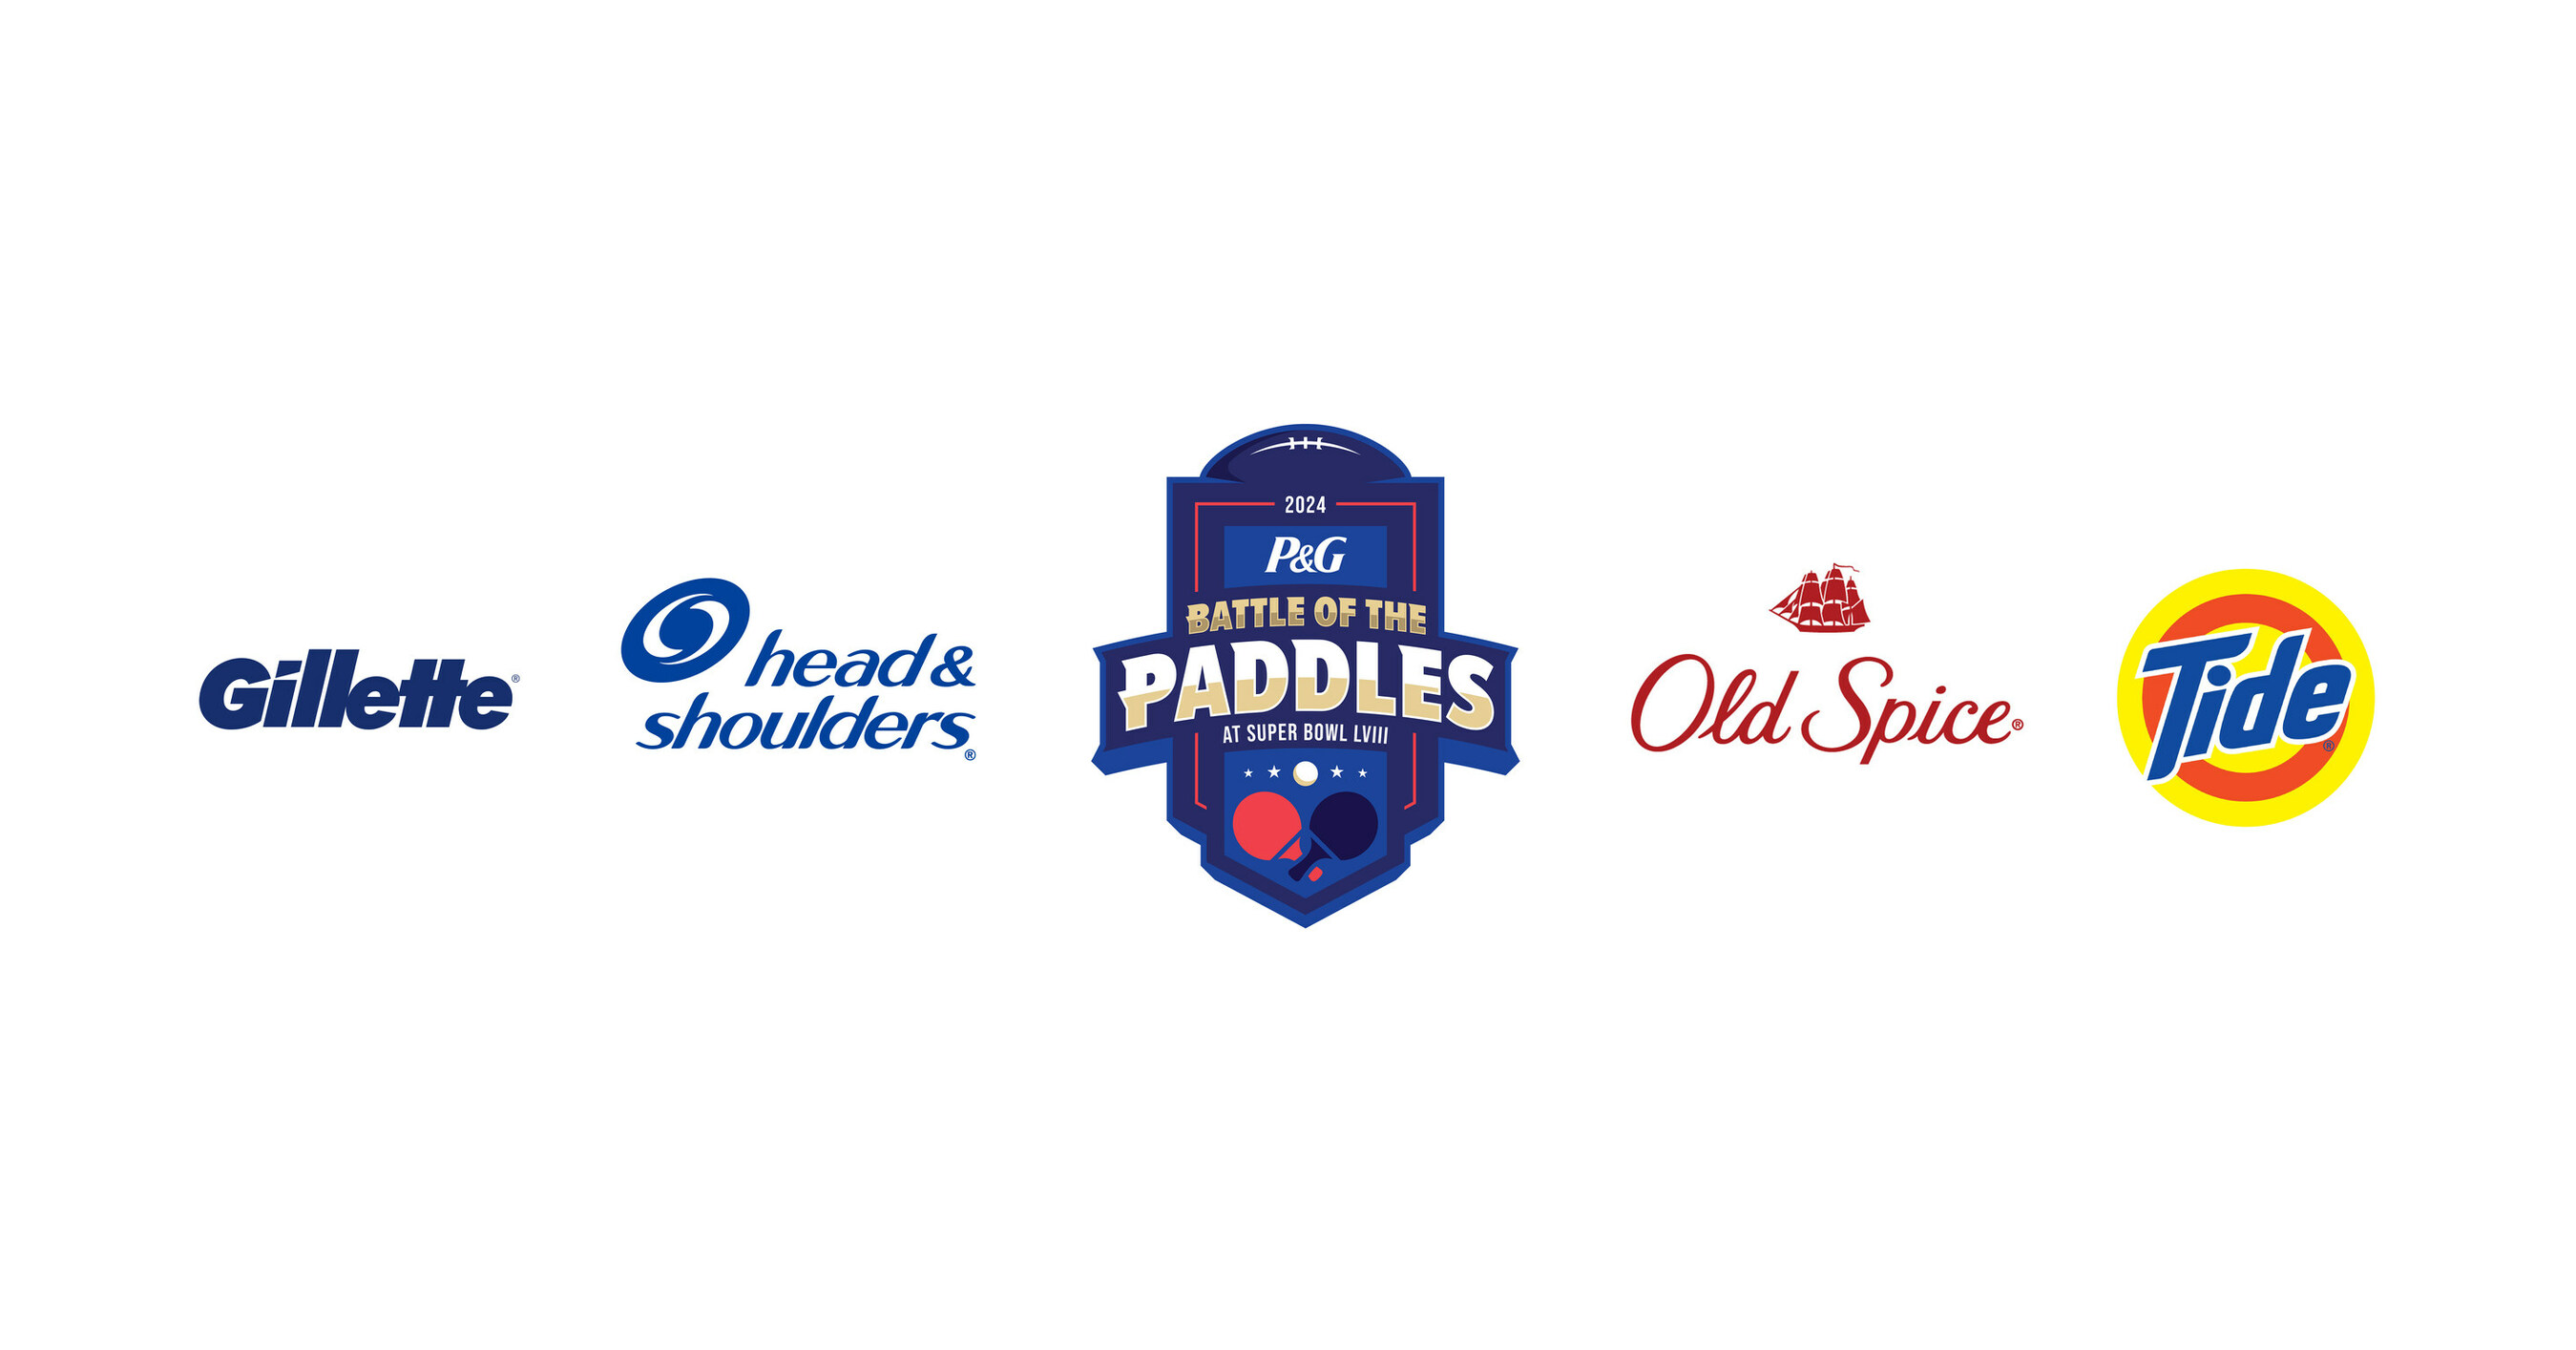 P&G Battle of the Paddles Returns to Super Bowl Week, Joining the